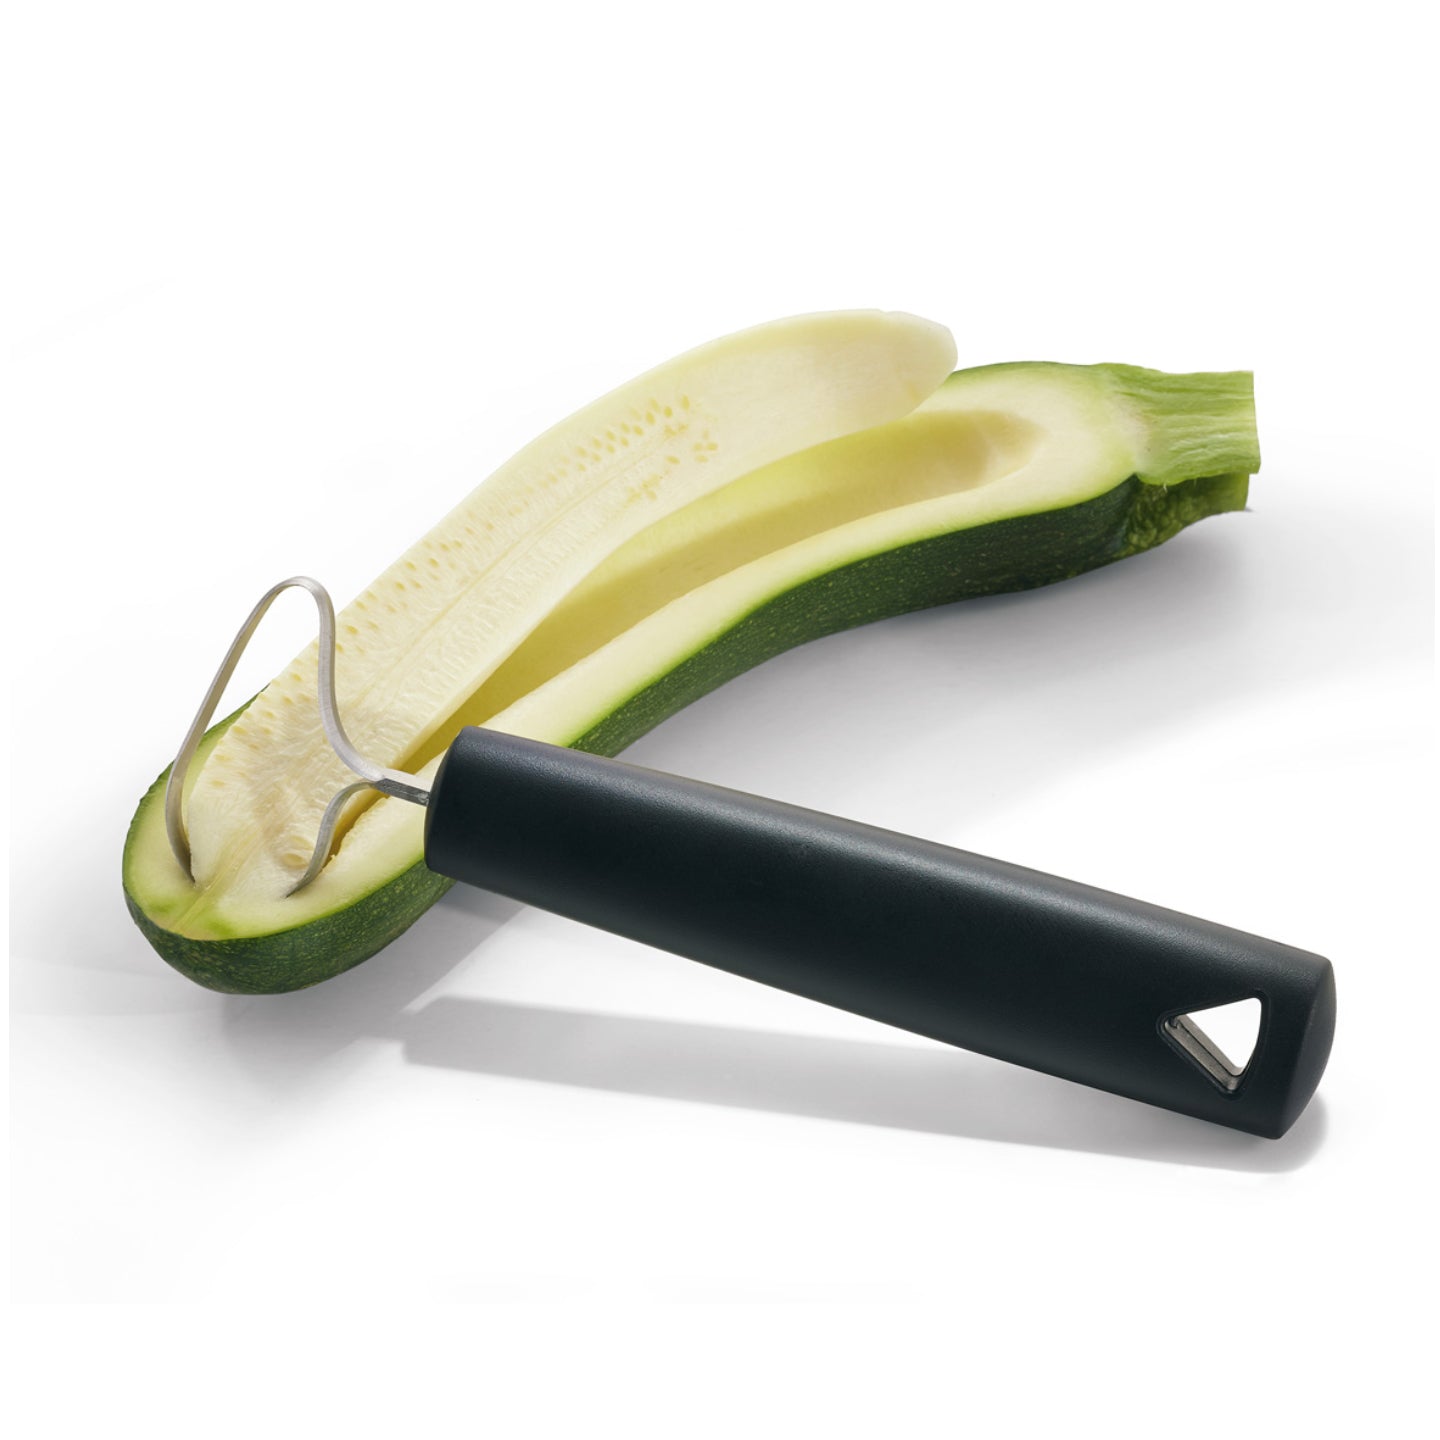 Triangle Vegetable and Fruit Corer